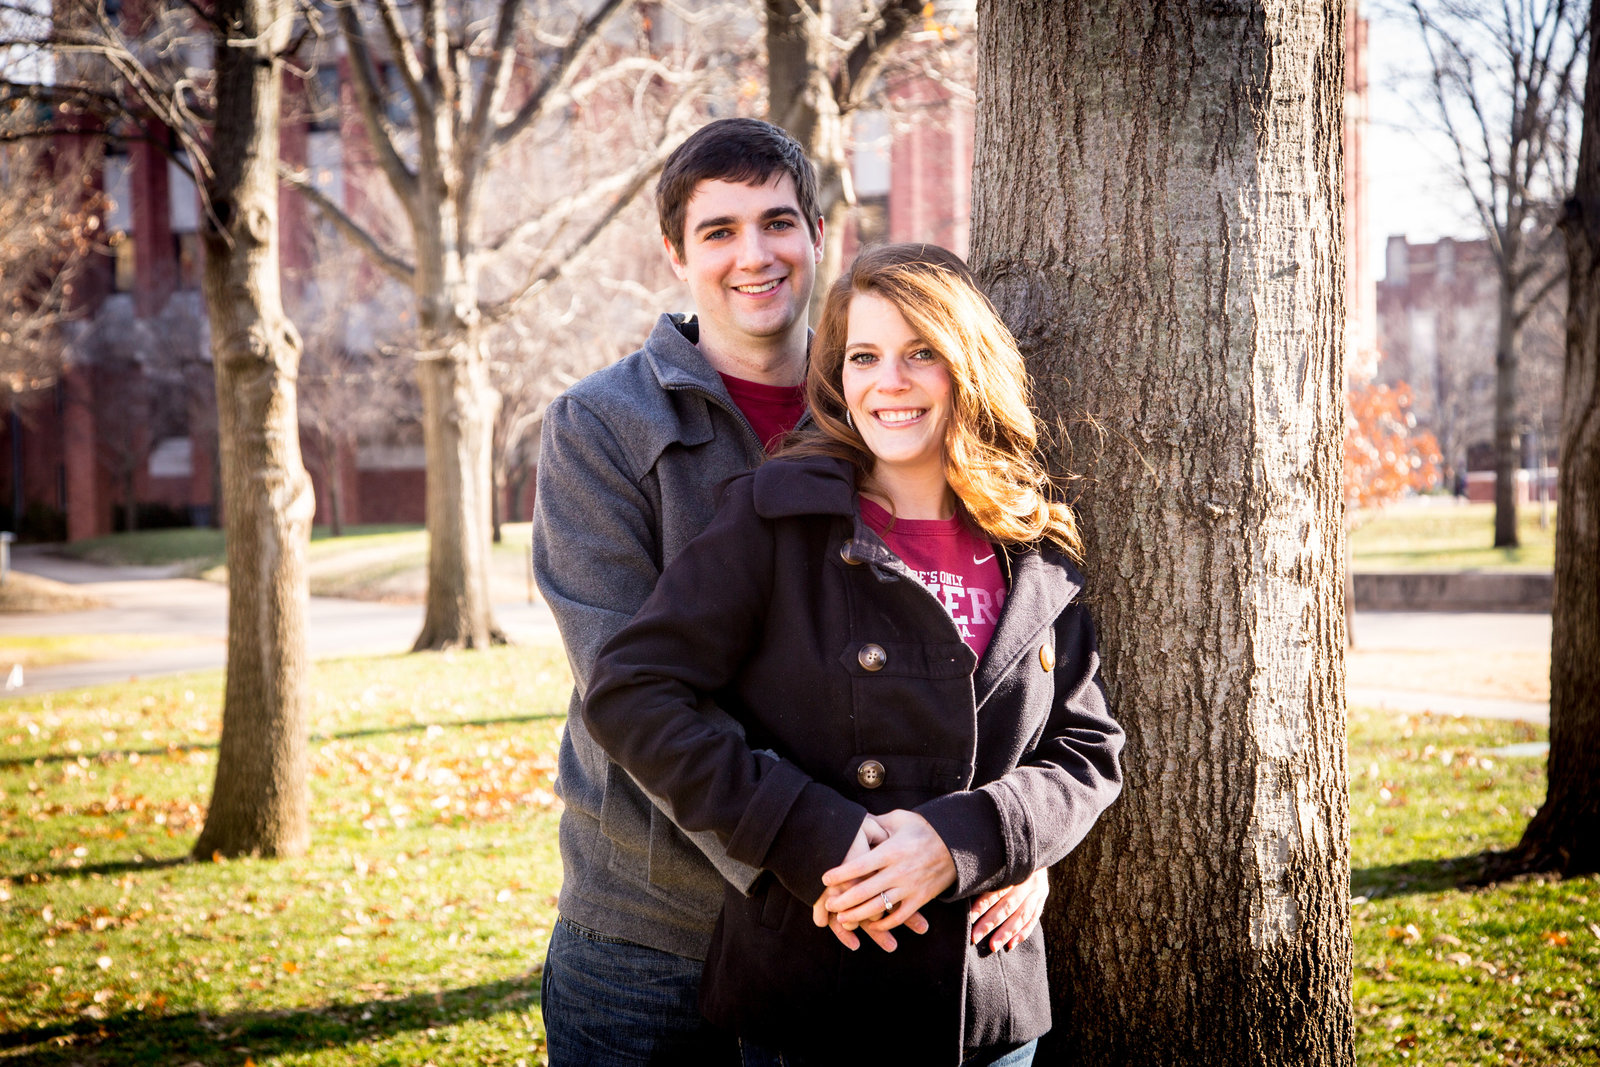 Oklahoma-sooners-campus-engagement-session-405-brides-photography